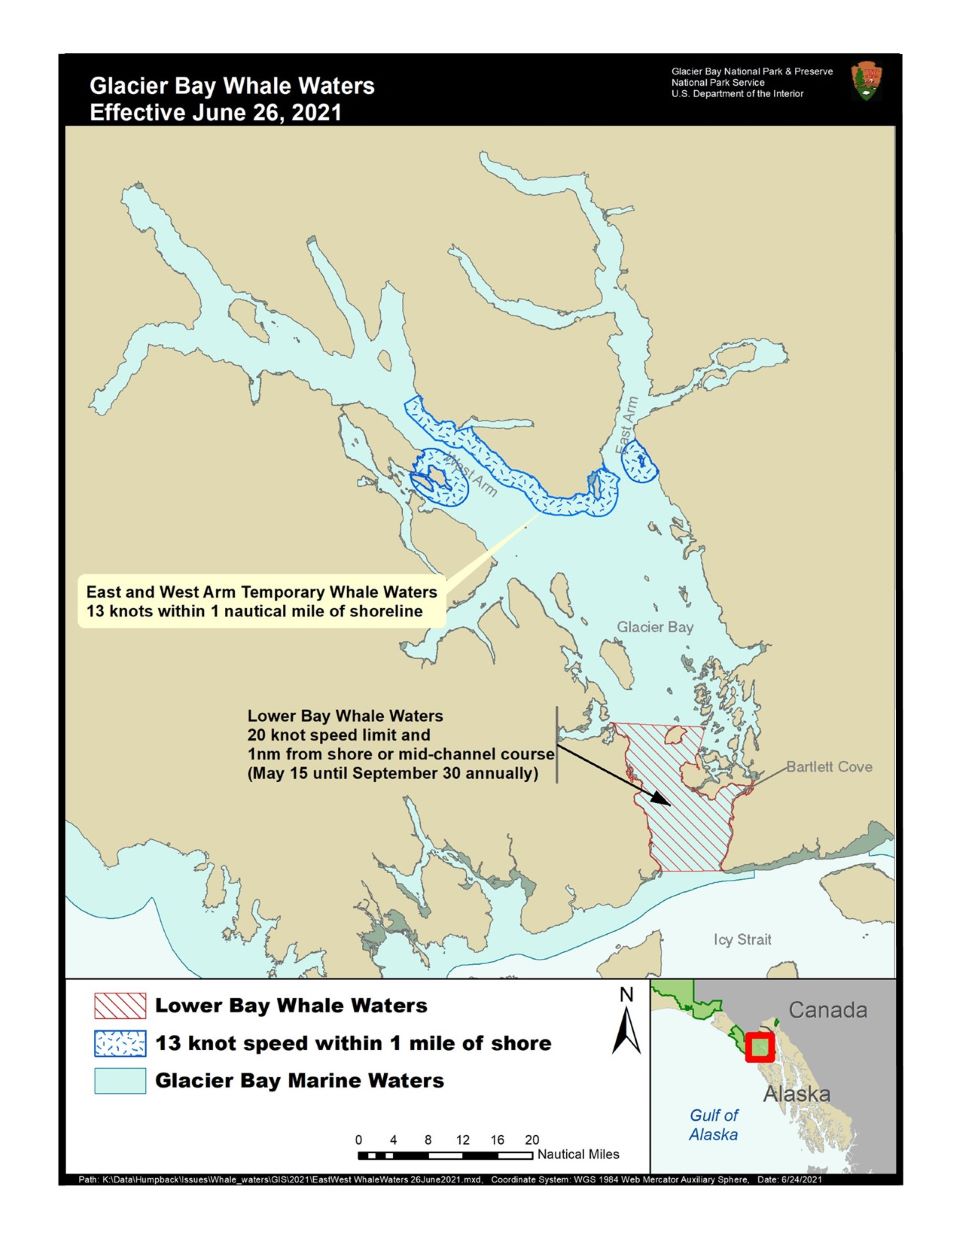 Glacier Bay map showing whale waters zones